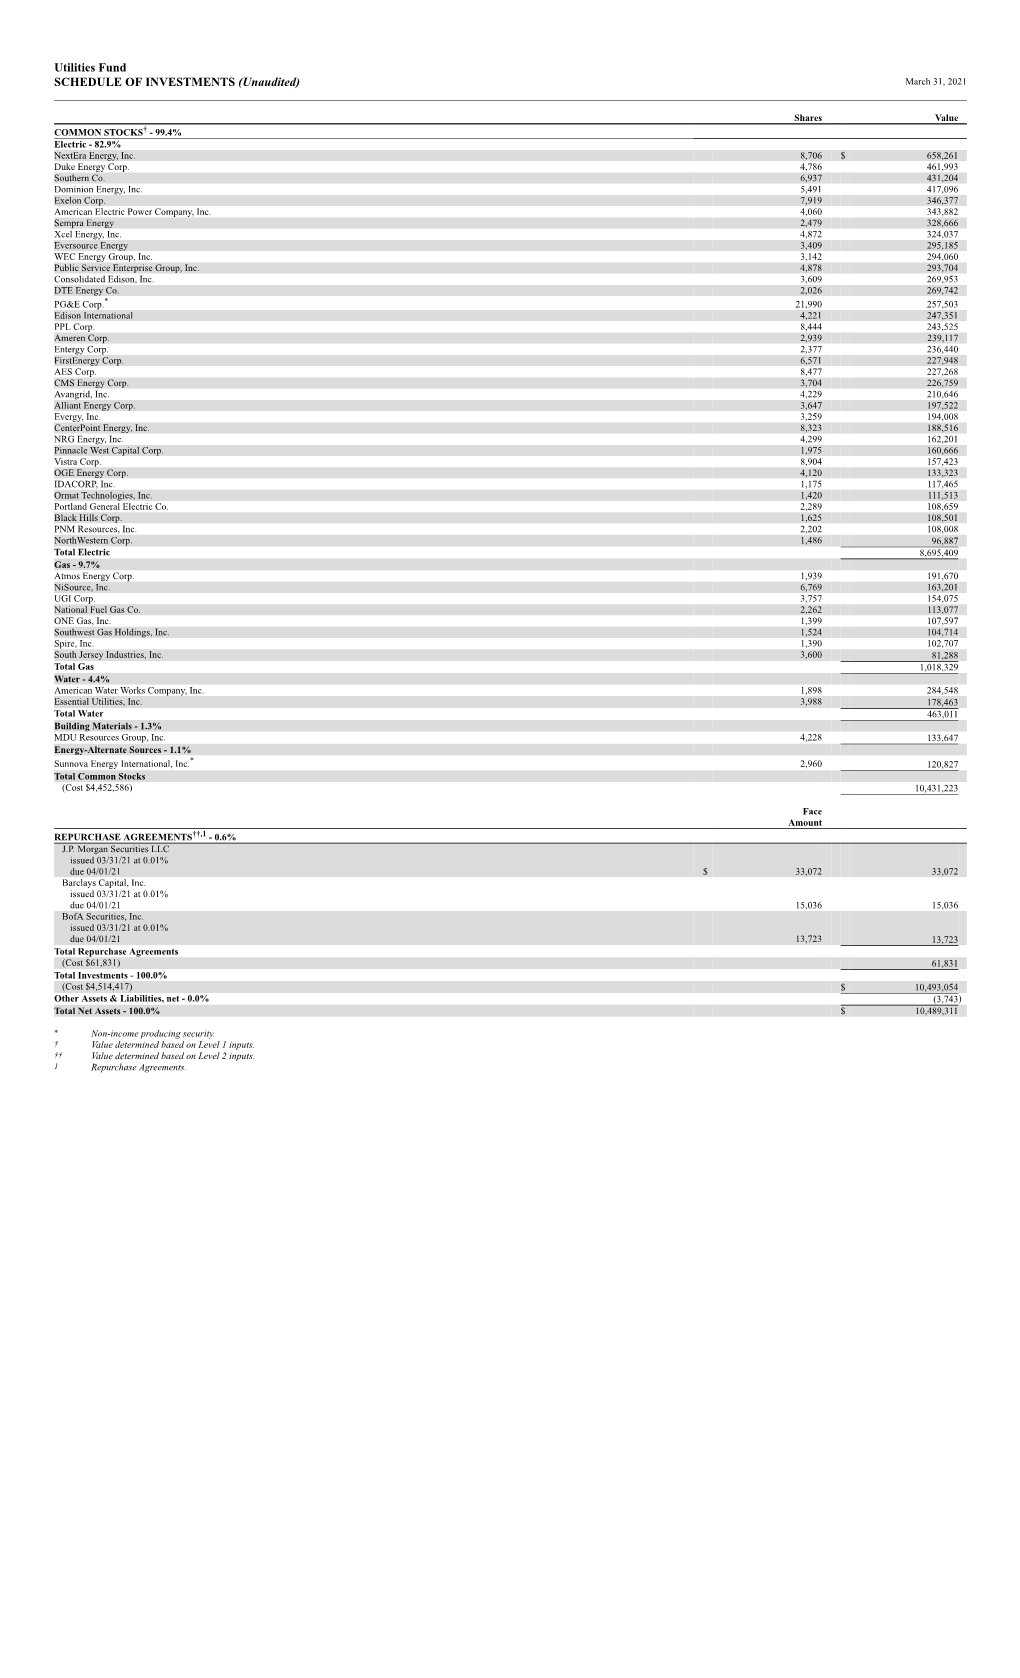 Utilities Fund SCHEDULE of INVESTMENTS (Unaudited) March 31, 2021